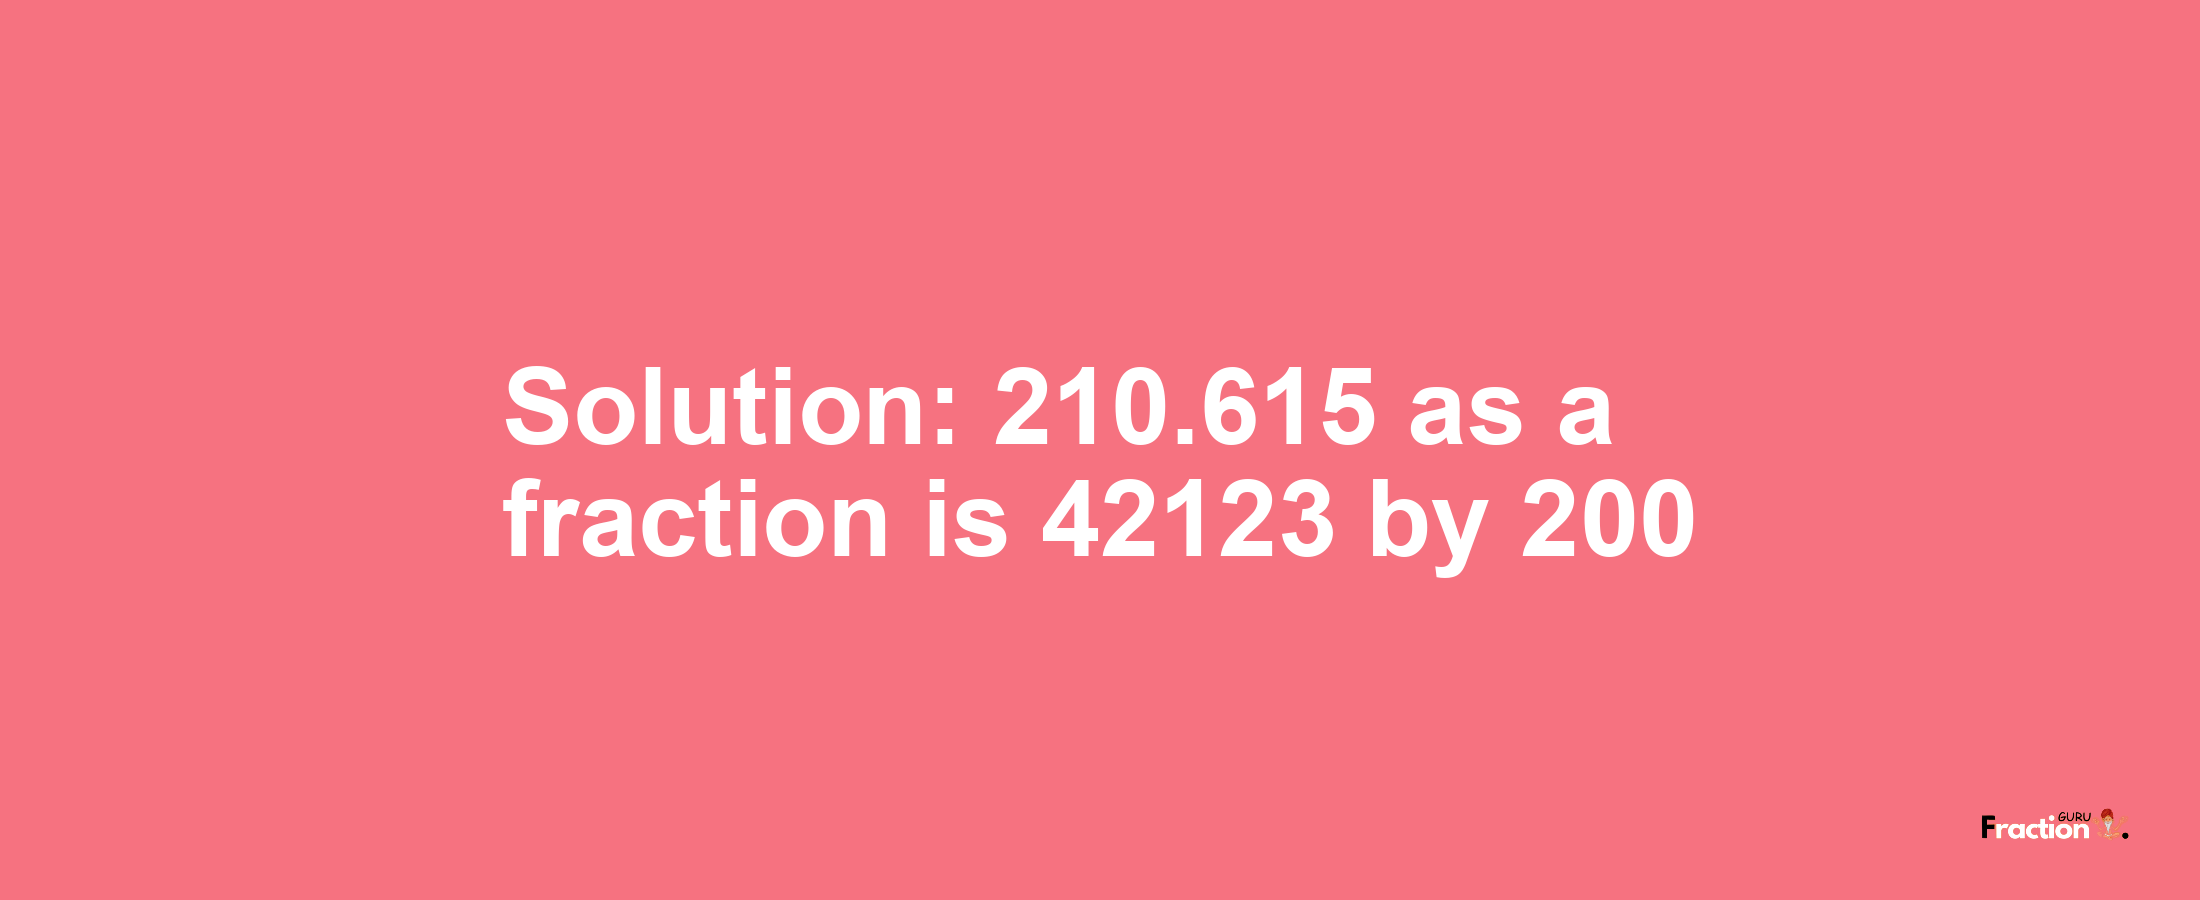 Solution:210.615 as a fraction is 42123/200